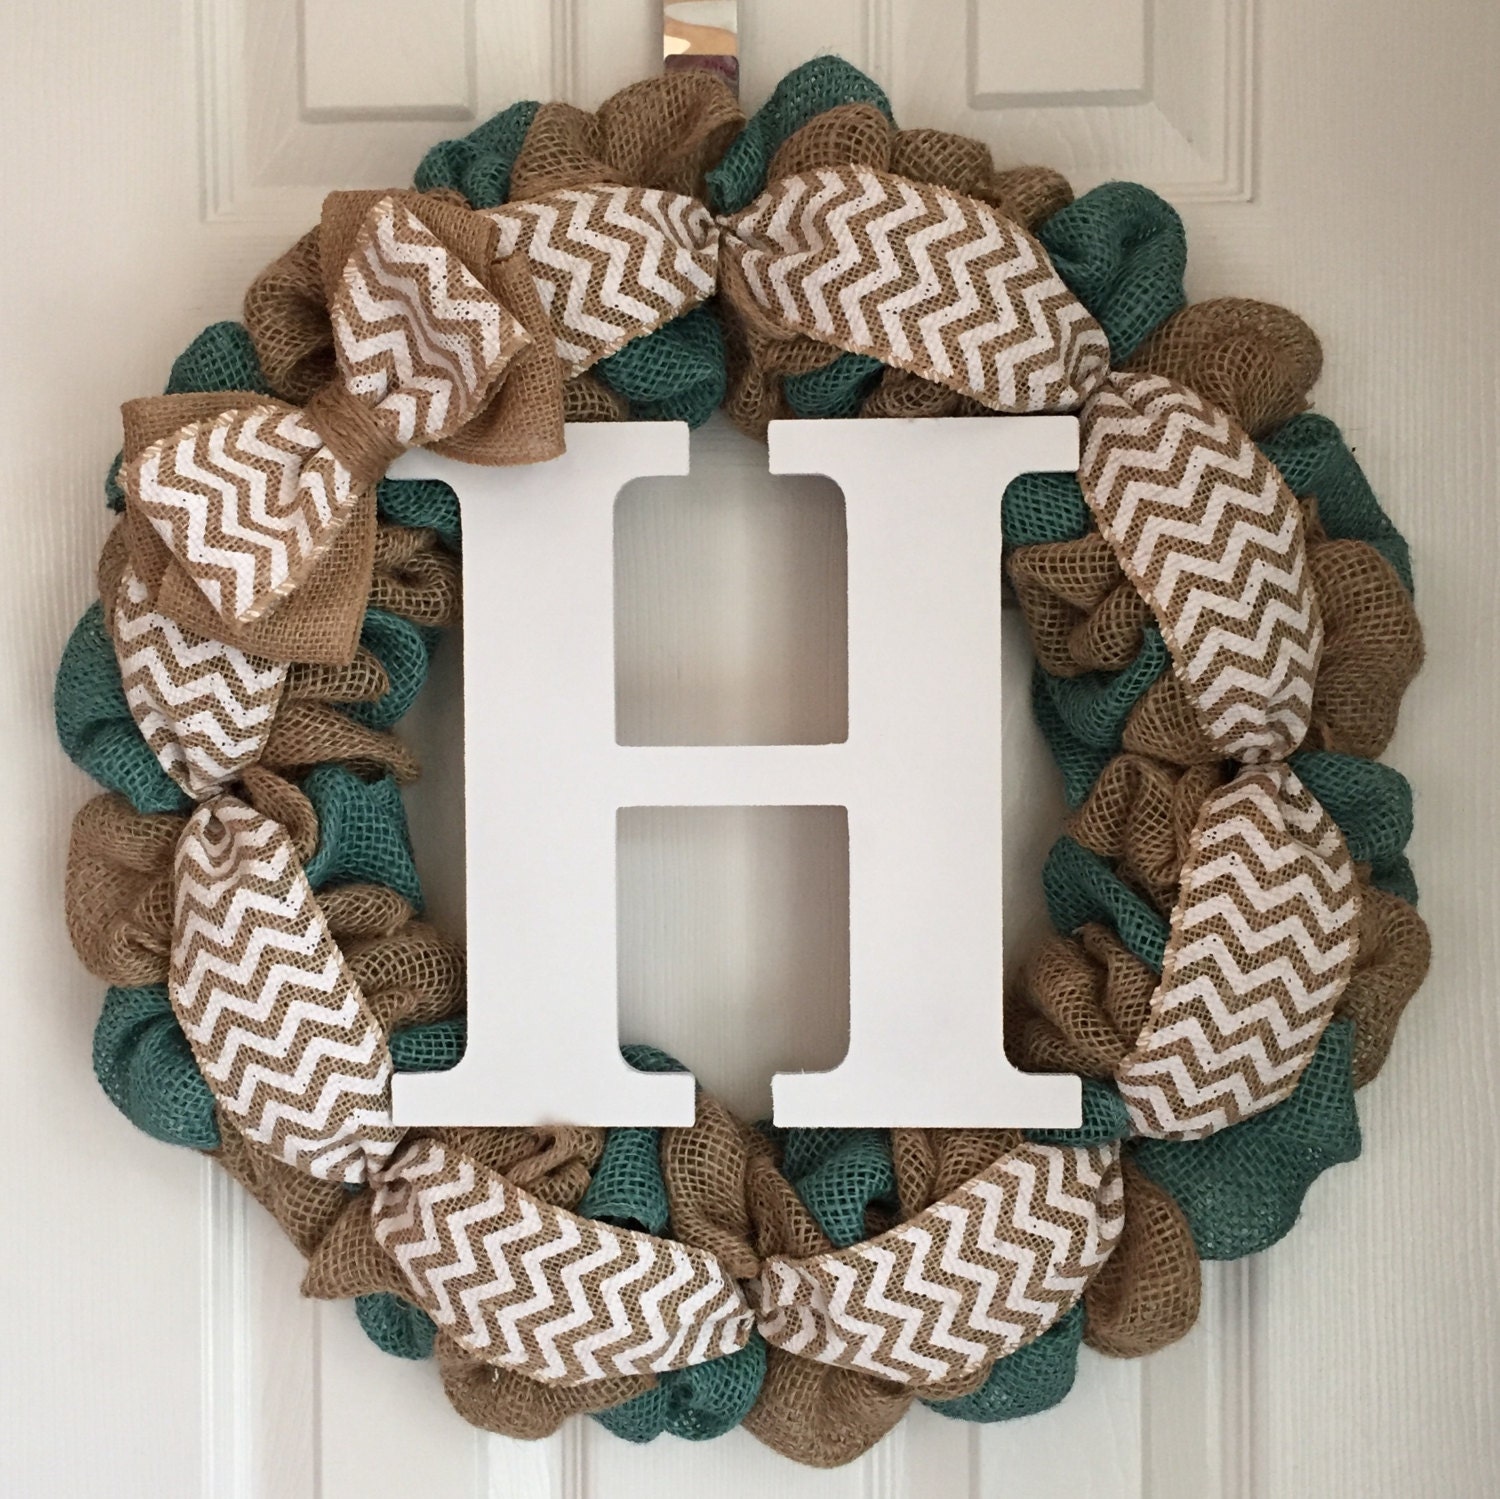 Two Toned Teal Wreath for Front Door - Every Day Wreath for Front Door - Teal Burlap Farmhouse Wreath - Anytime Wreath - Teal Door Decor